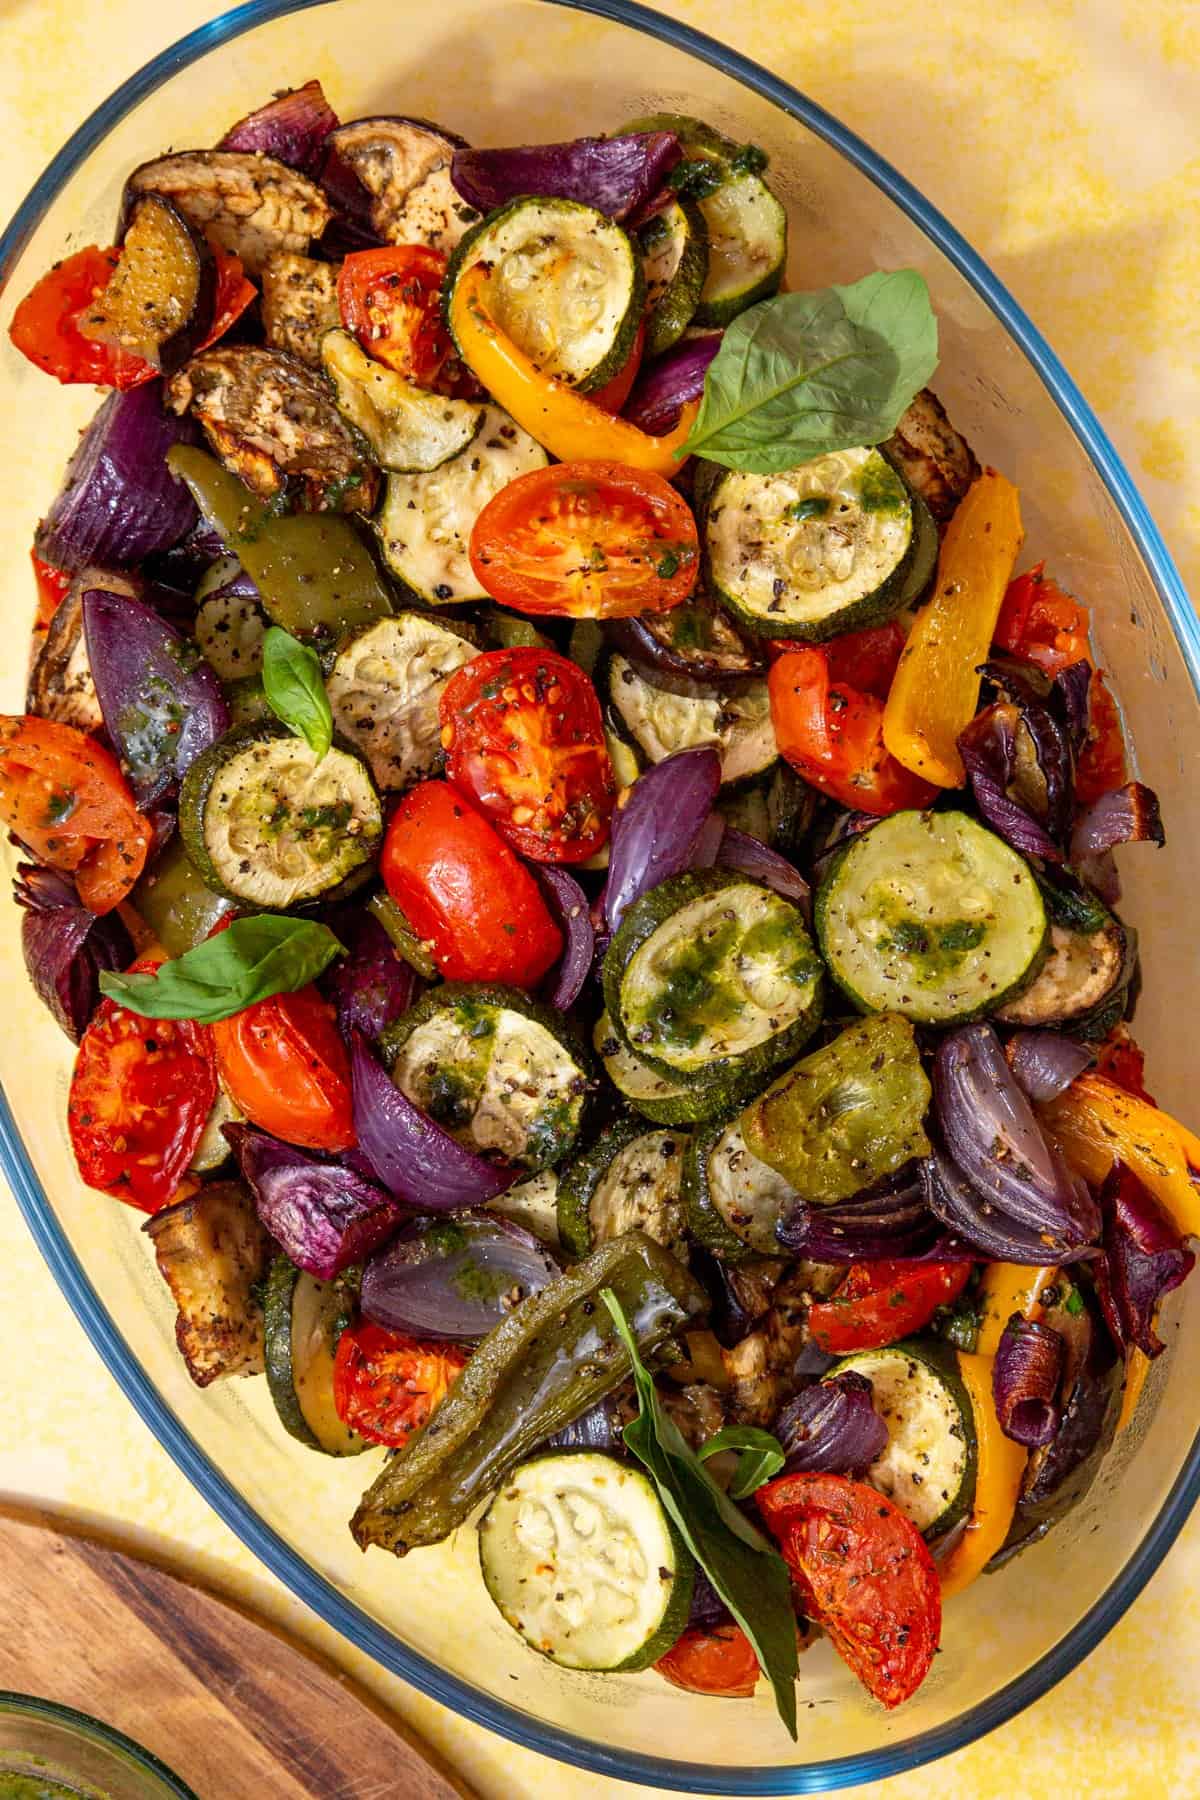 Roasted vegetables such a courgettes, tomatoes, peppers, red onions in a glass oval dish on a yellow background.